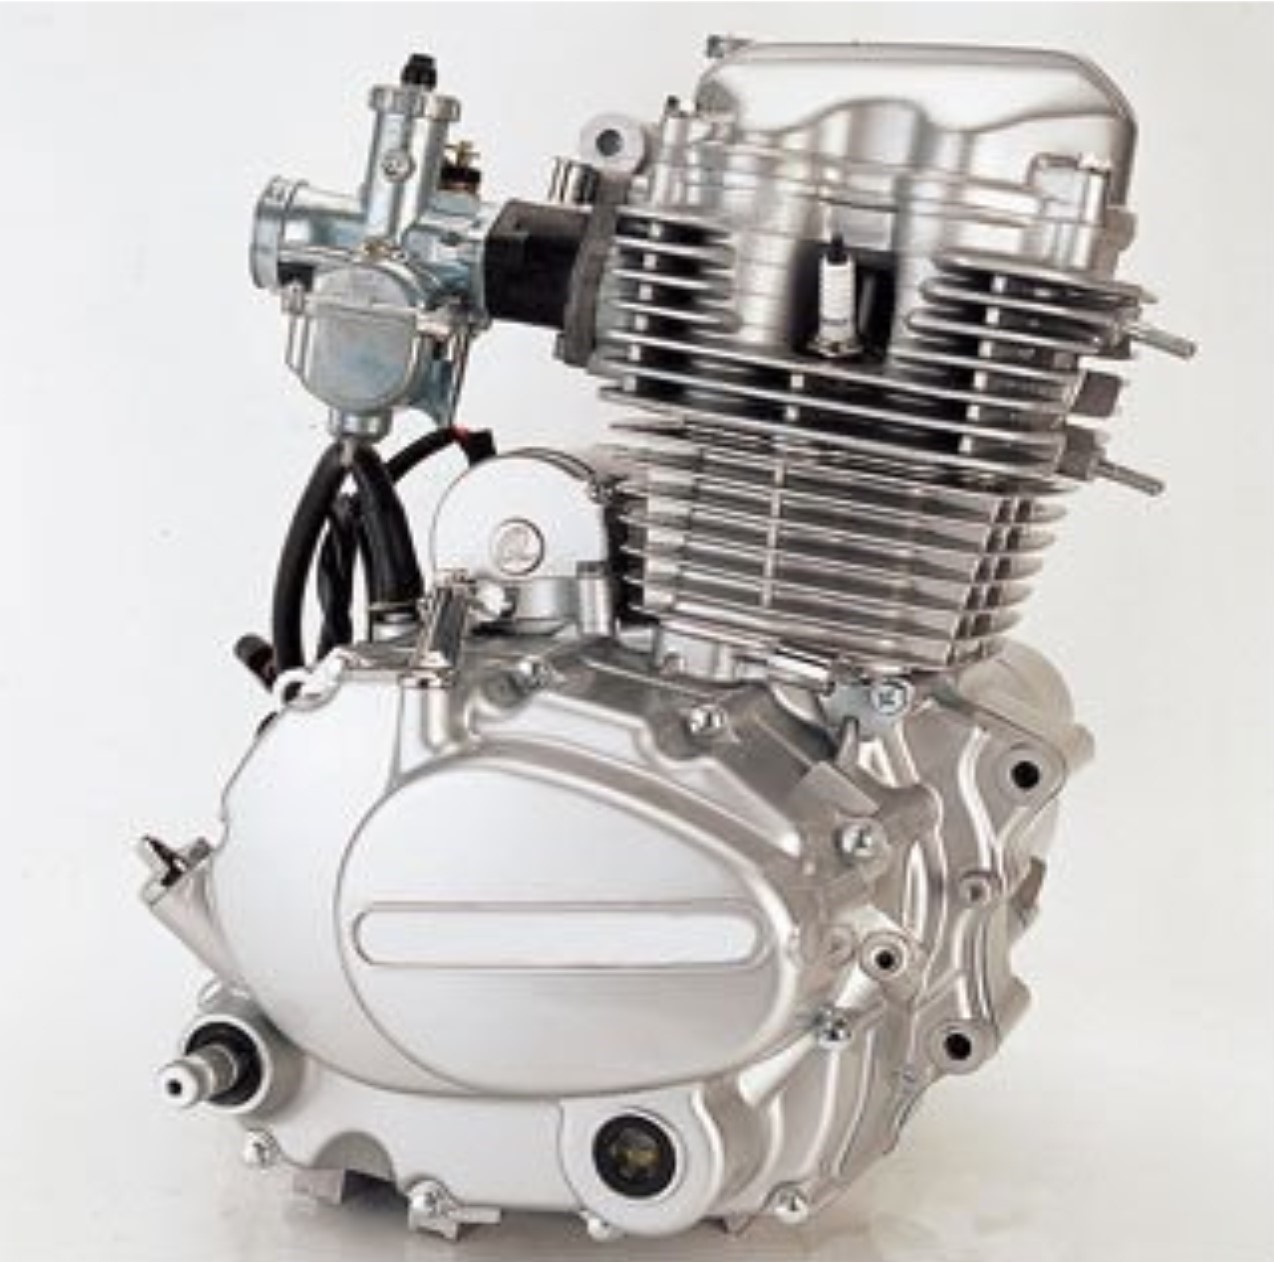 Engine Parts For 200cc CG Air Cooled